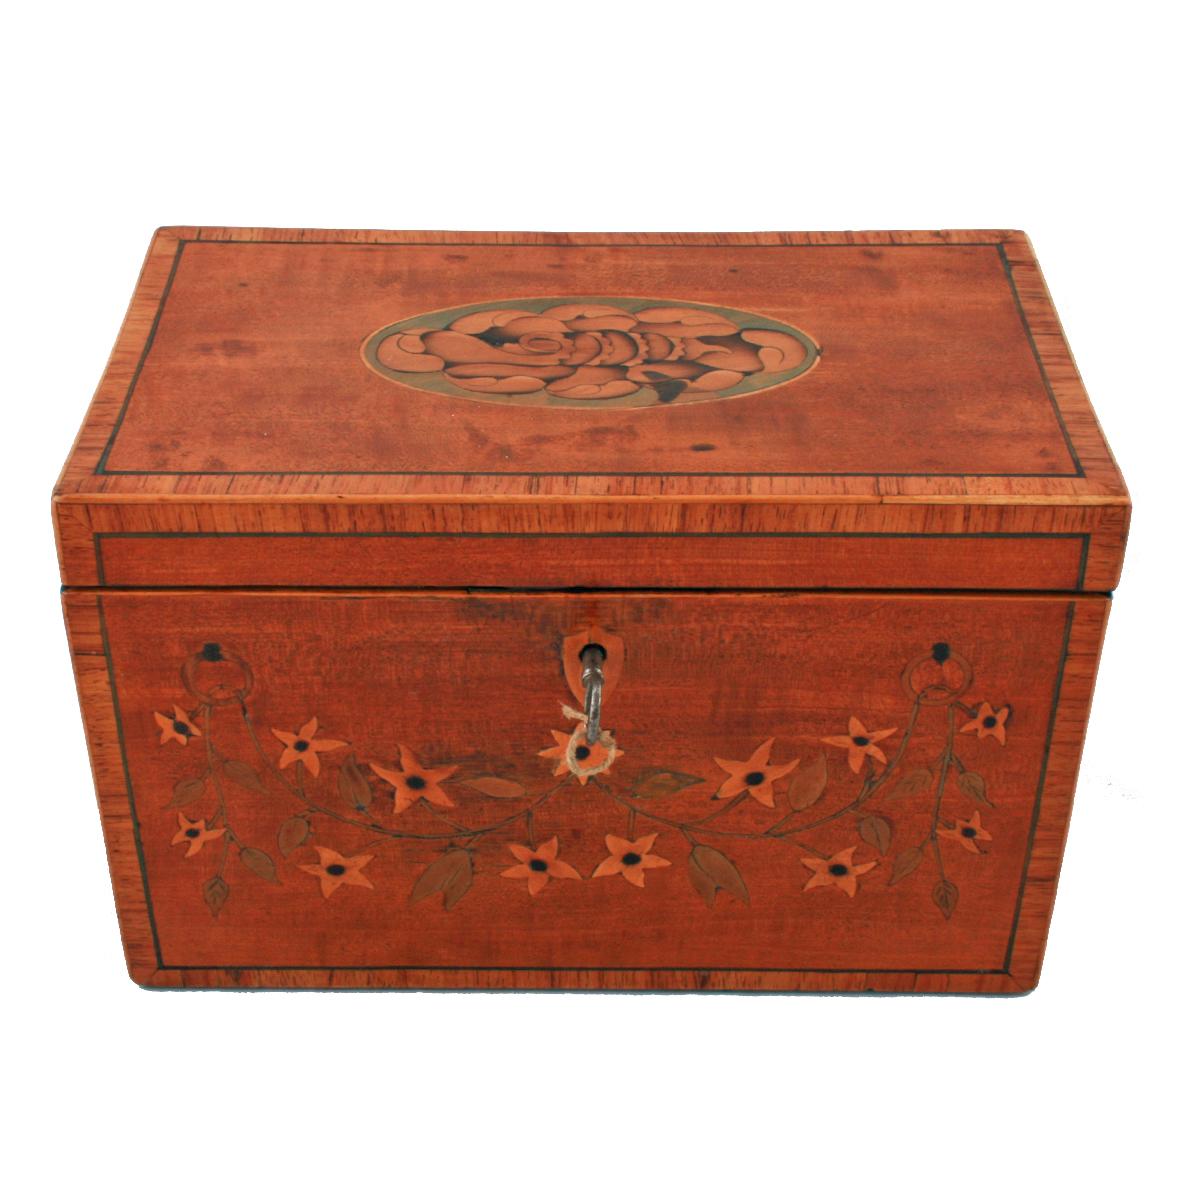 A late 18th century Sheraton satinwood veneered tea caddy.

The tea caddy is kingwood crossbanded edges, ebony line stringing and has marquetry inlay to the top of the lid and front.

The interior has two mahogany lids with brass knob handles